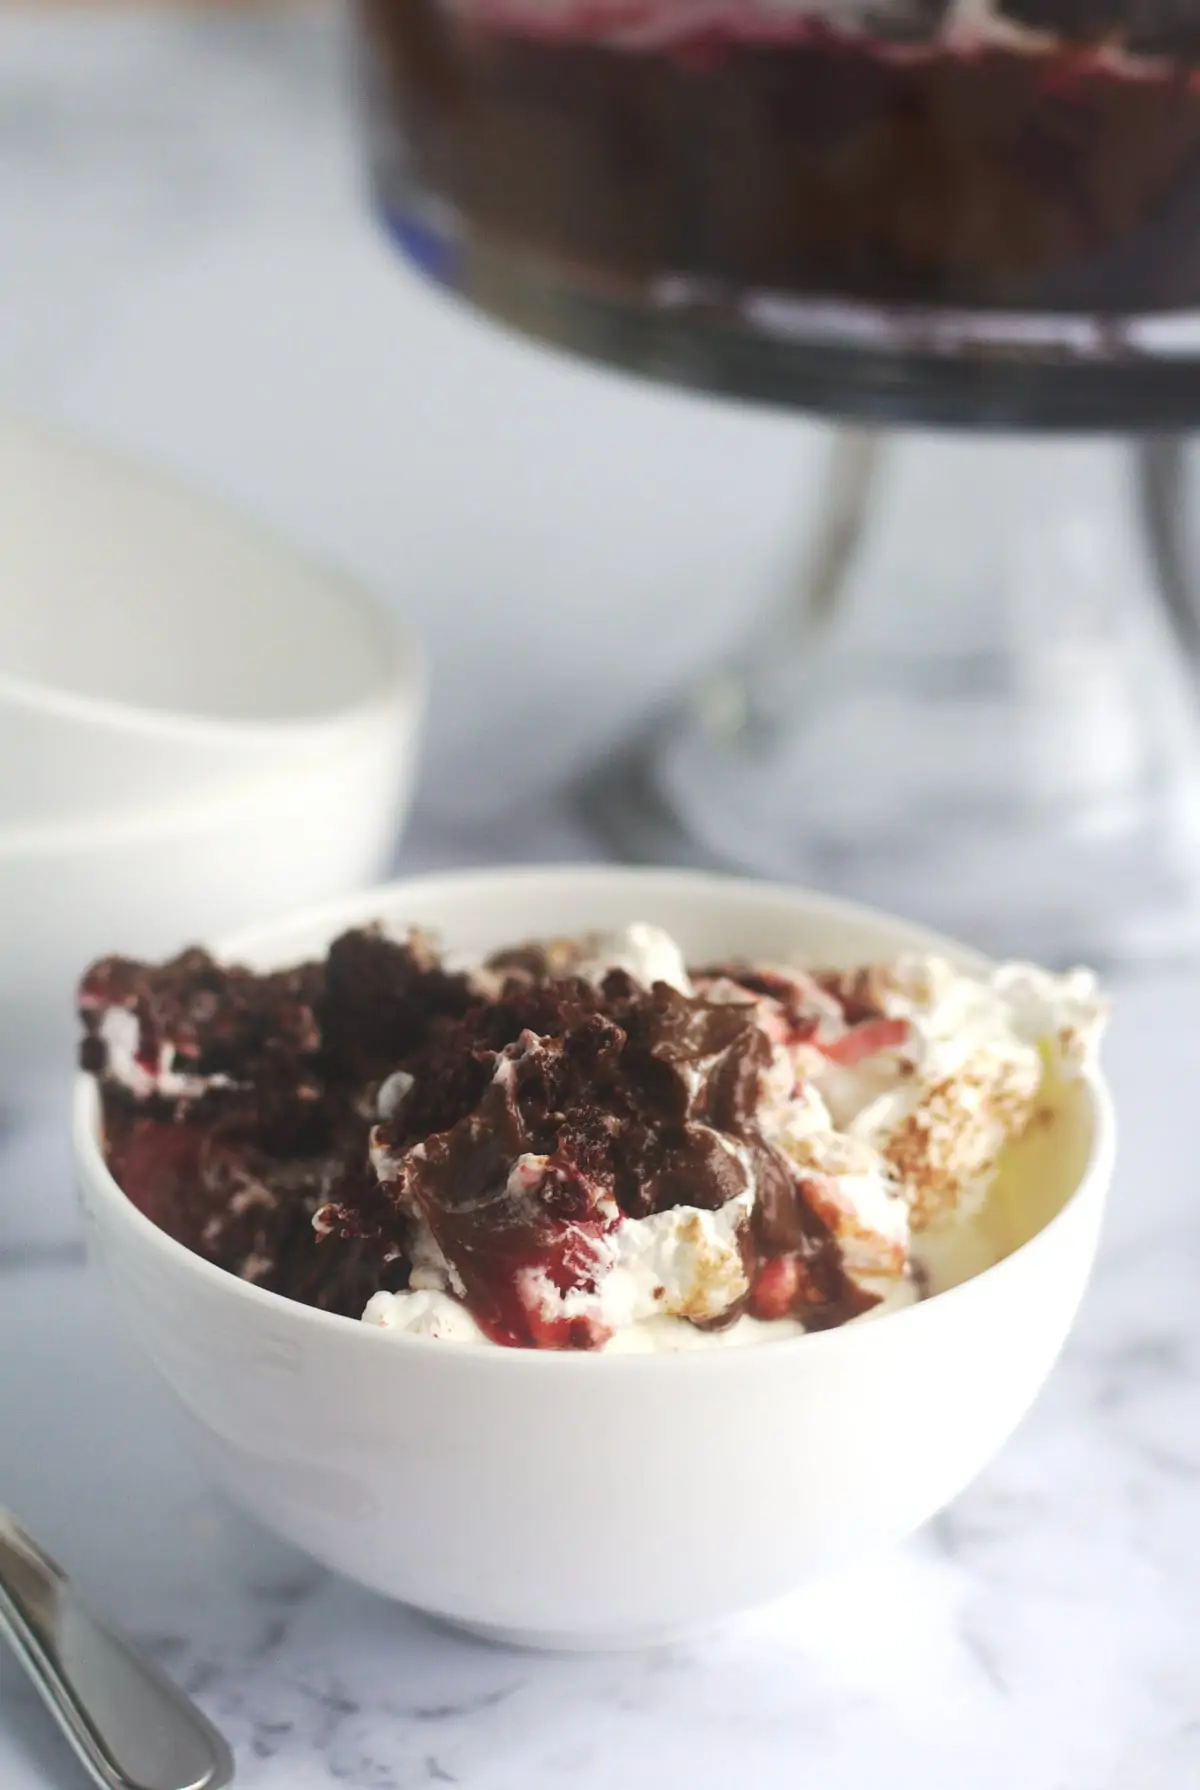 Trifle in a white bowl.